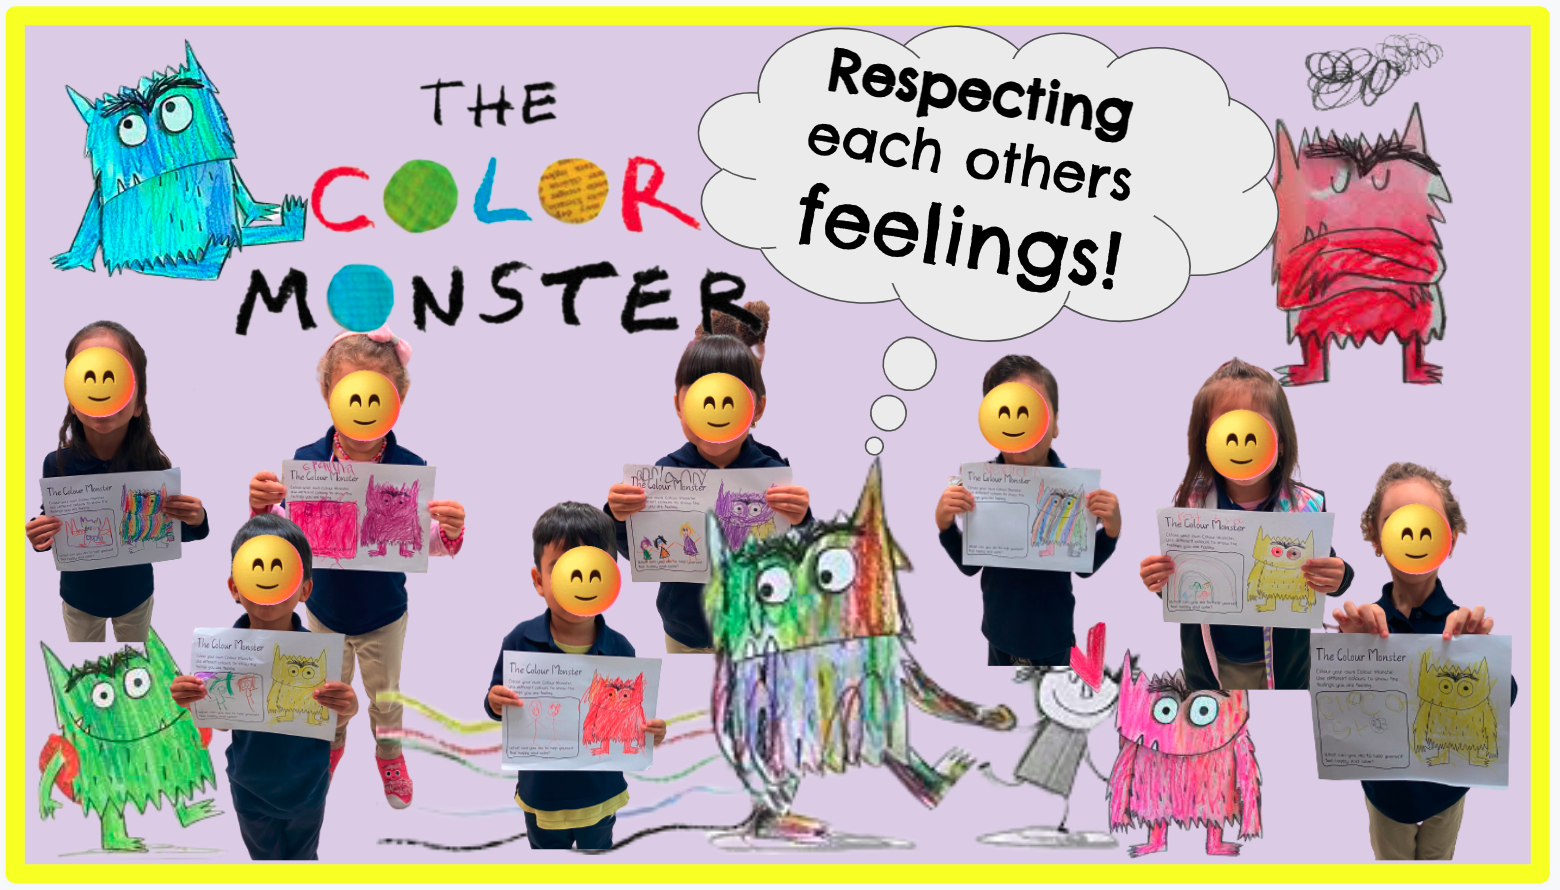 The Color Monster during the Week of Respect